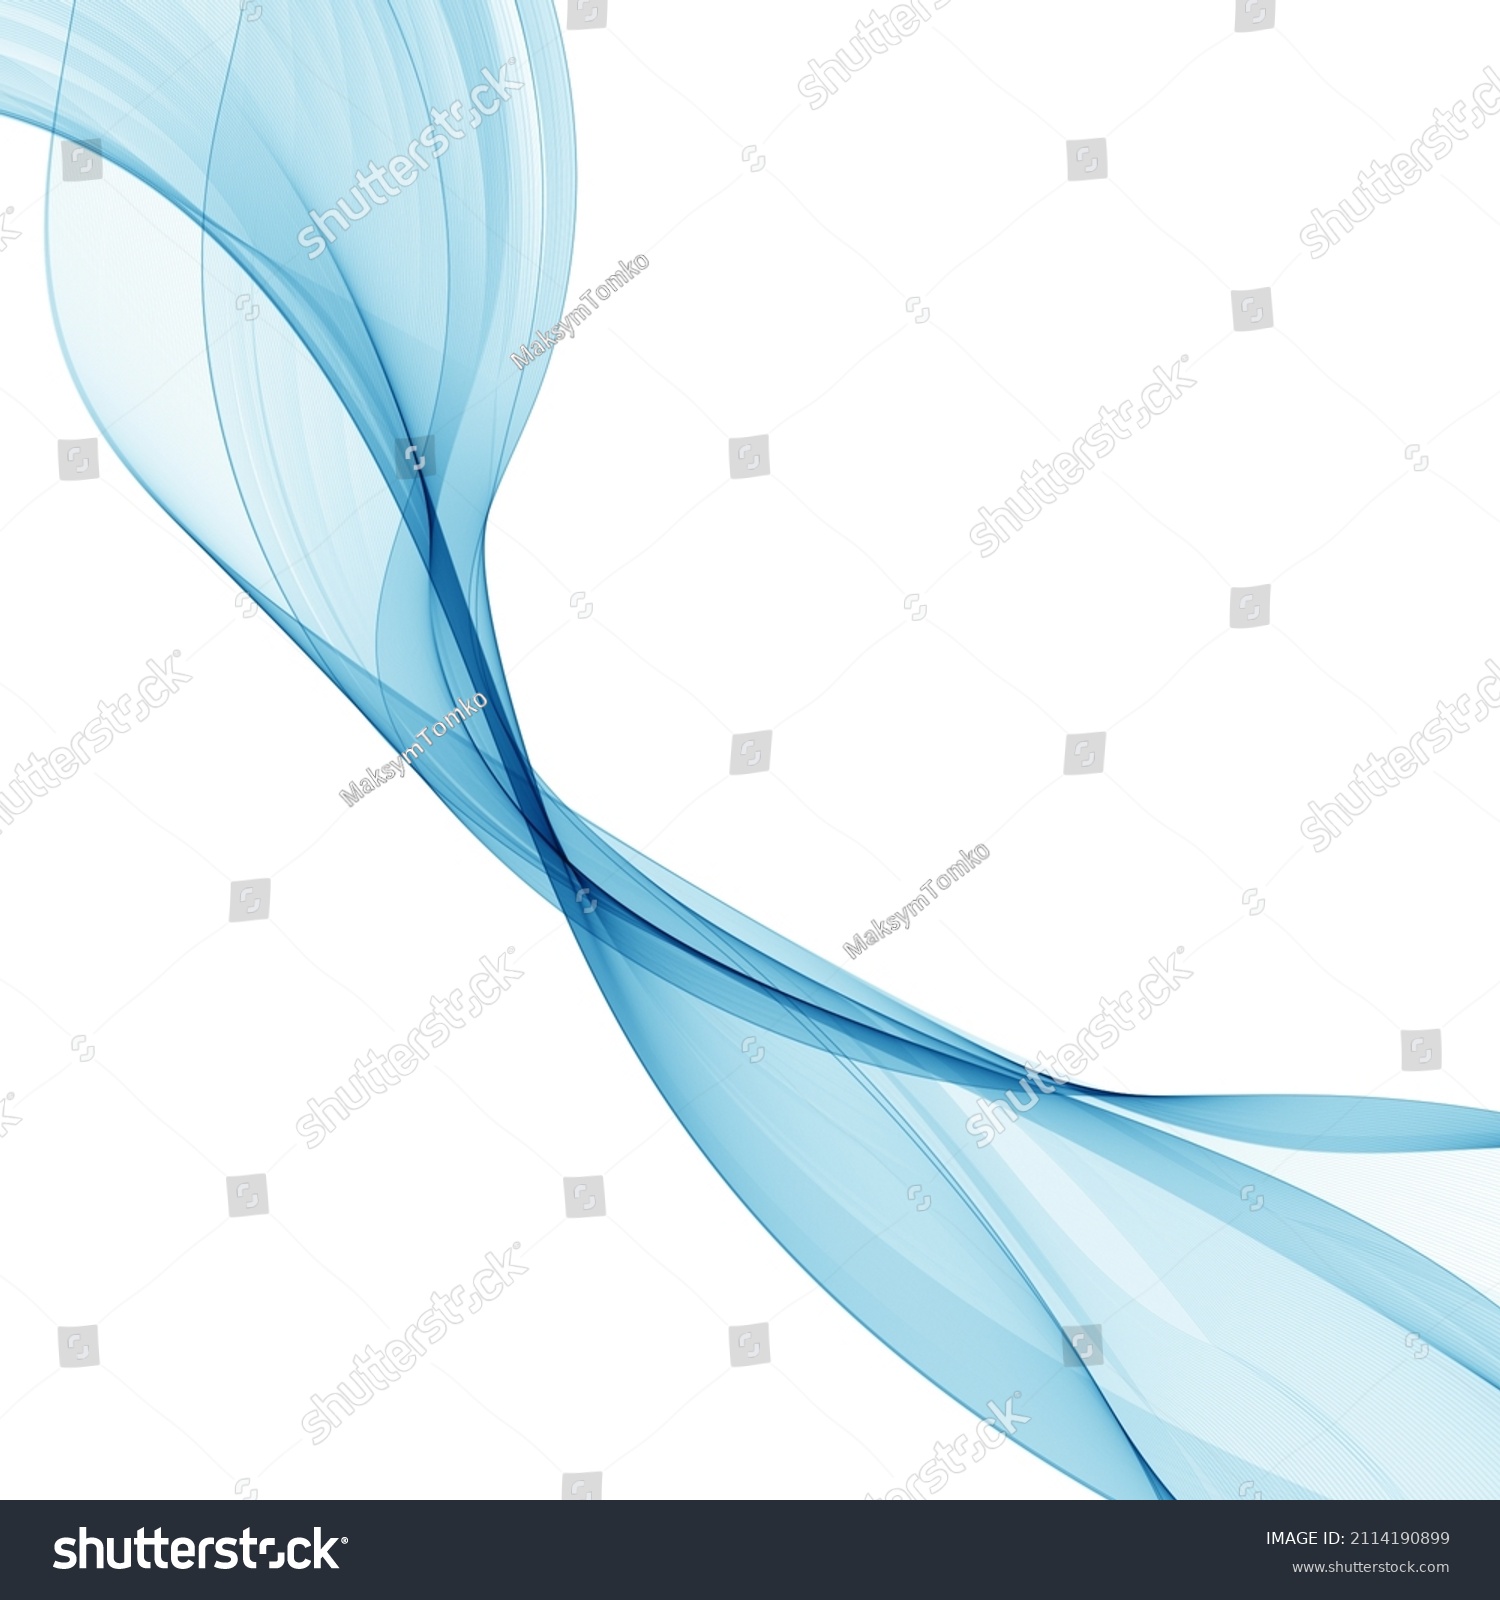 Blue Abstract Wave Vector Background Design Stock Vector Royalty Free Shutterstock